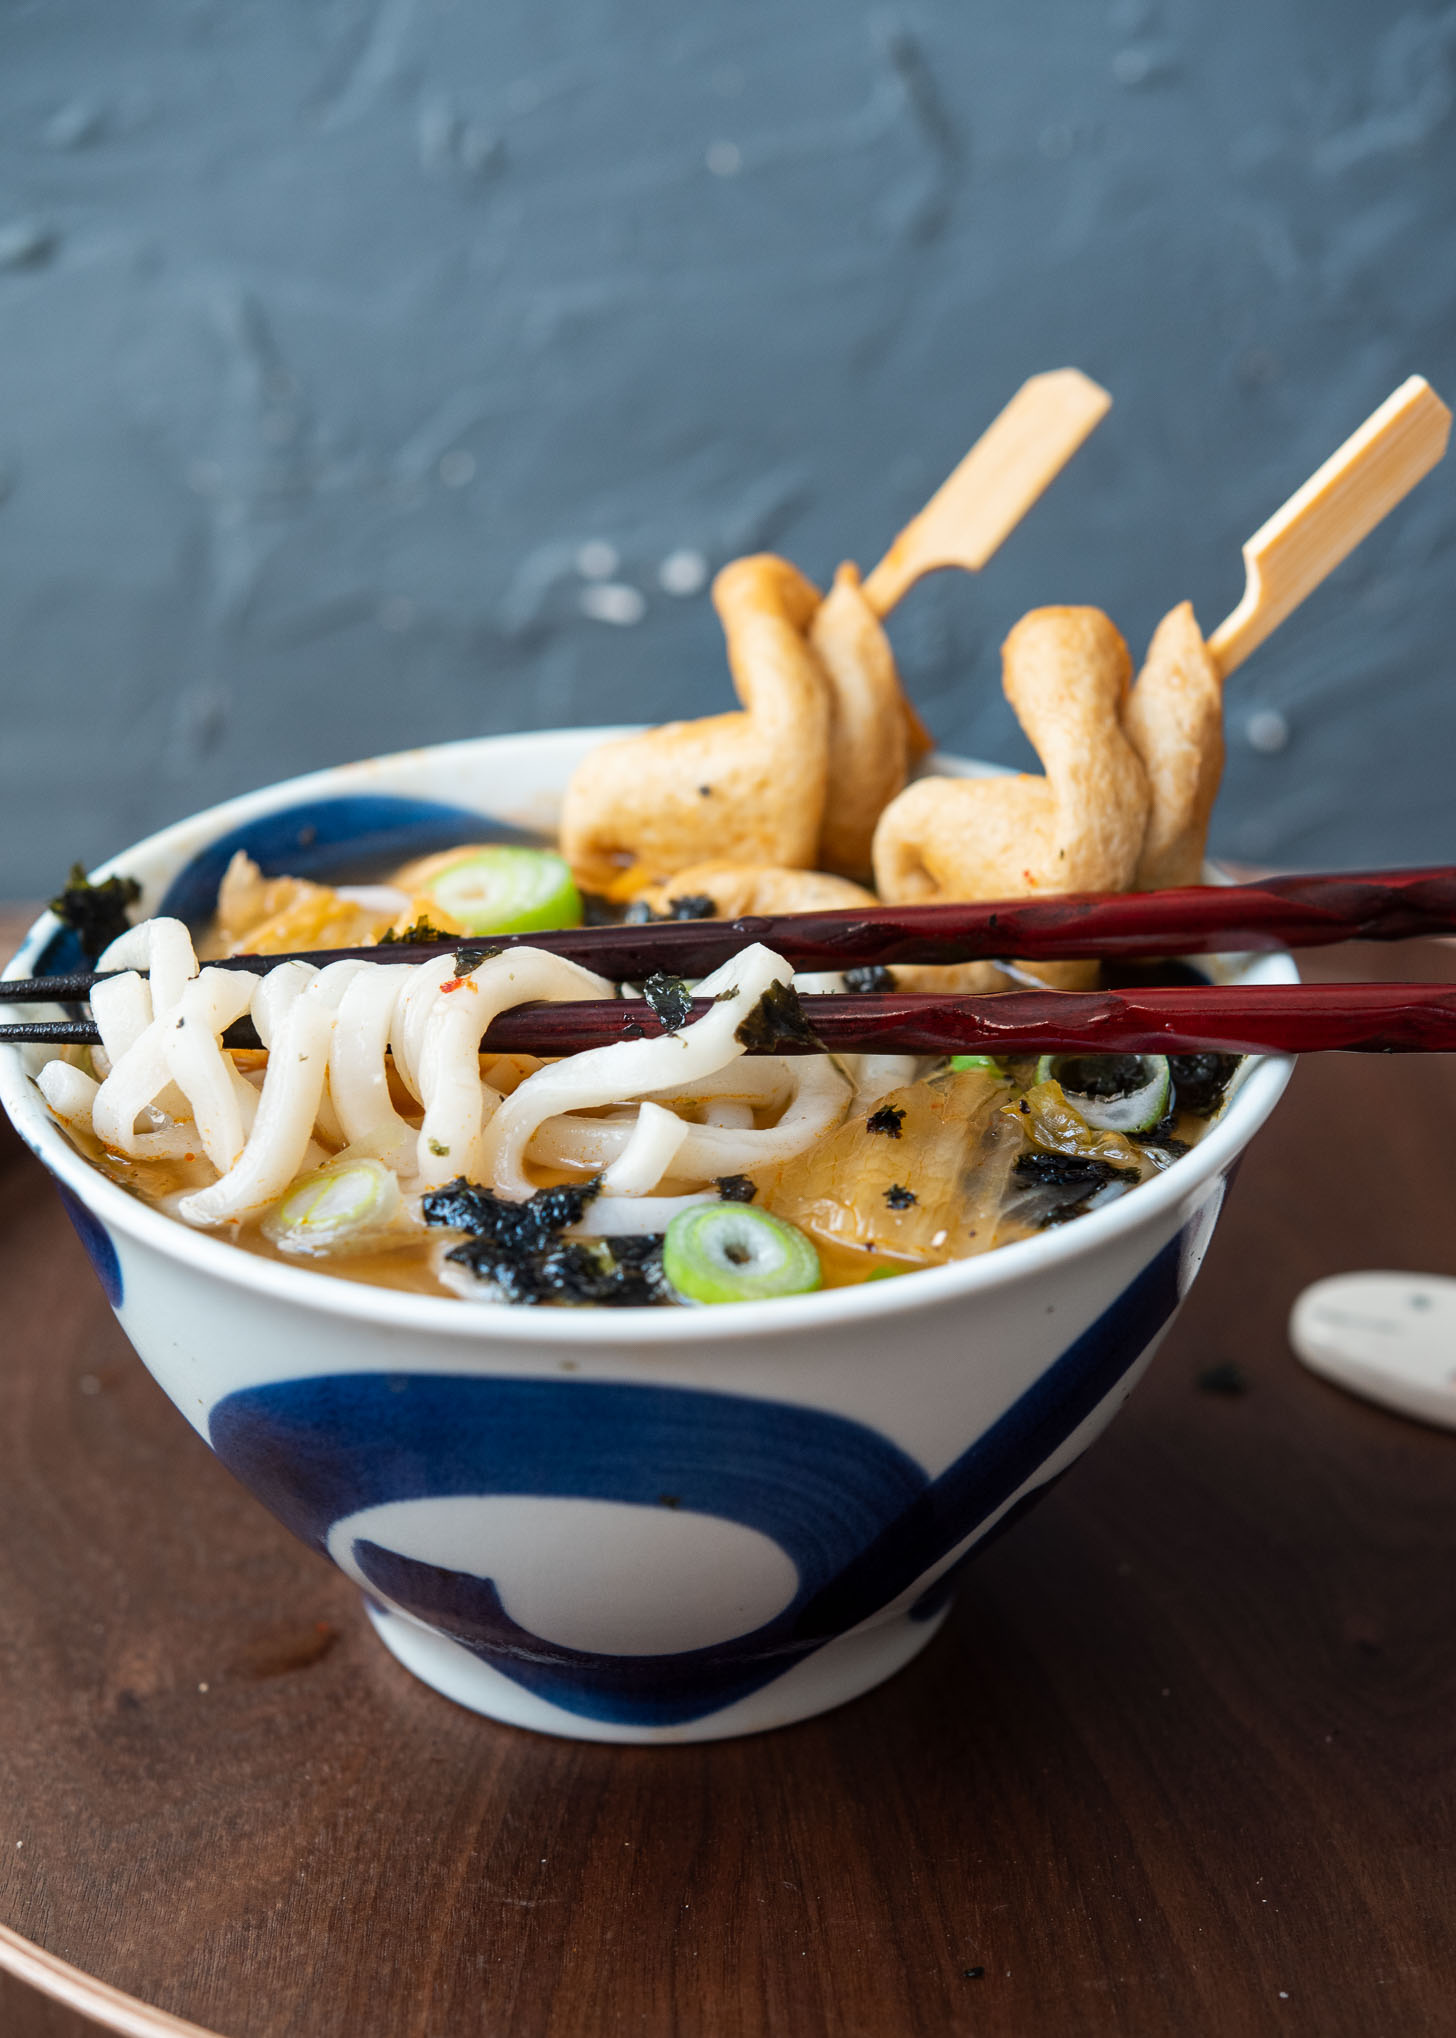 Chewy udon noodles with kimchi flavored dashi soup in a bowl.